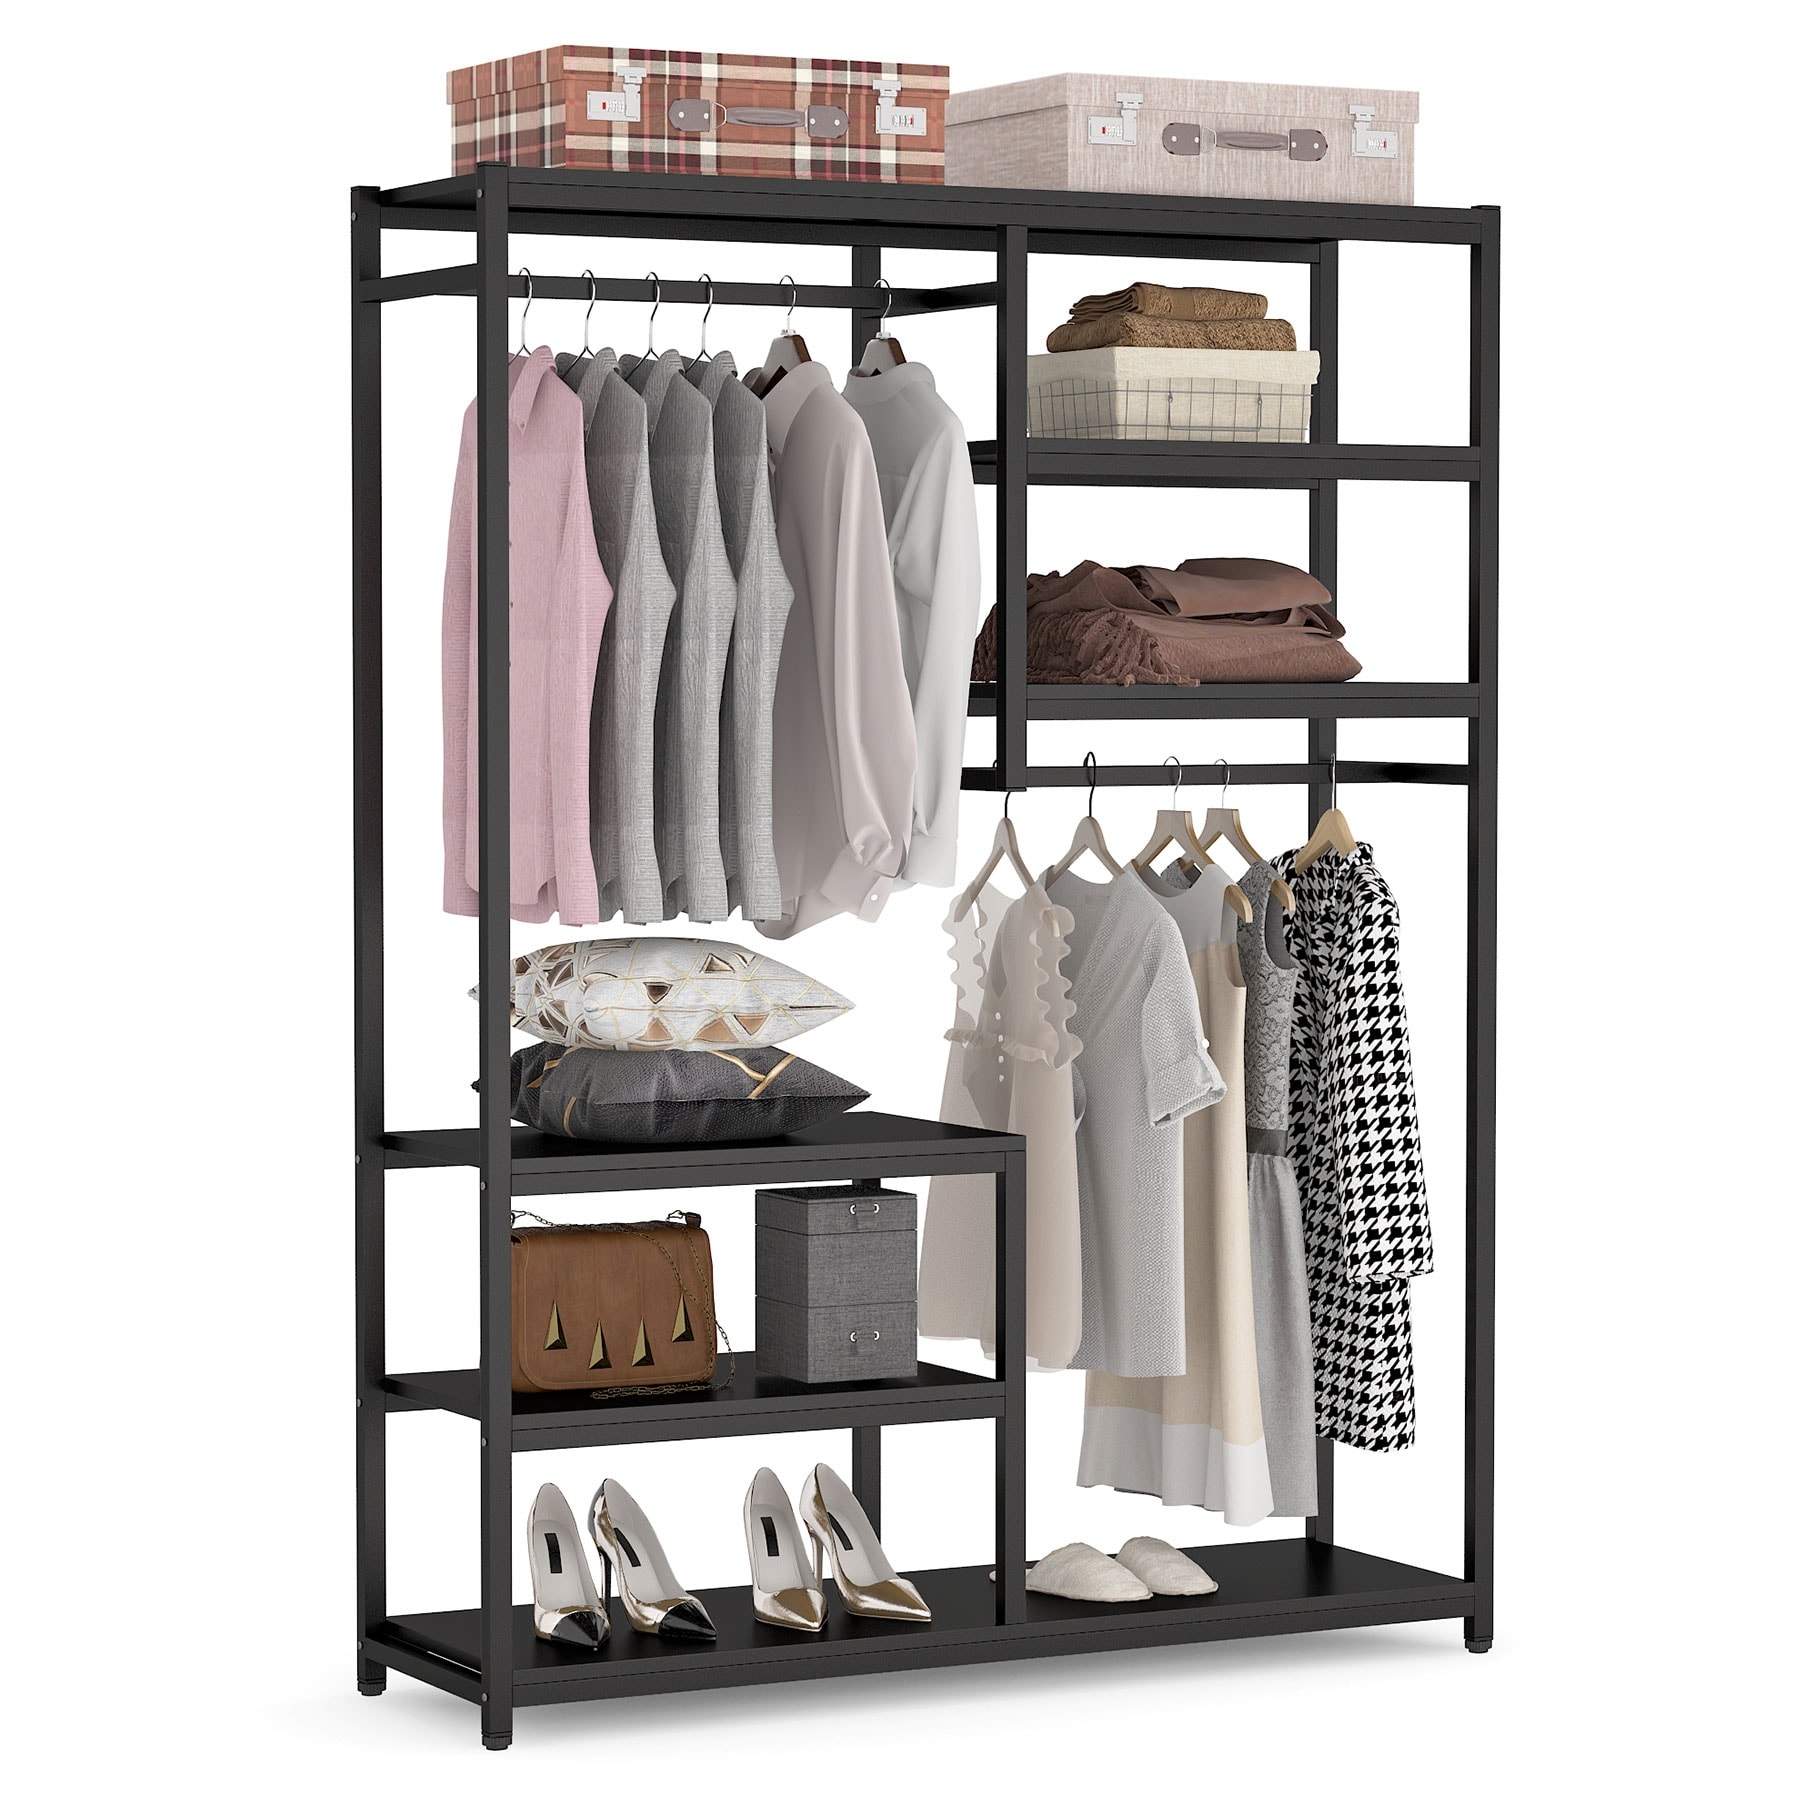 https://ak1.ostkcdn.com/images/products/is/images/direct/4b1164451bbc6f42e548d28cc28b2cd4fbd34783/Large-closet-organizer-Double-Hanging-Rod-Clothes-Garment-Racks-with-Storage-Shelves.jpg